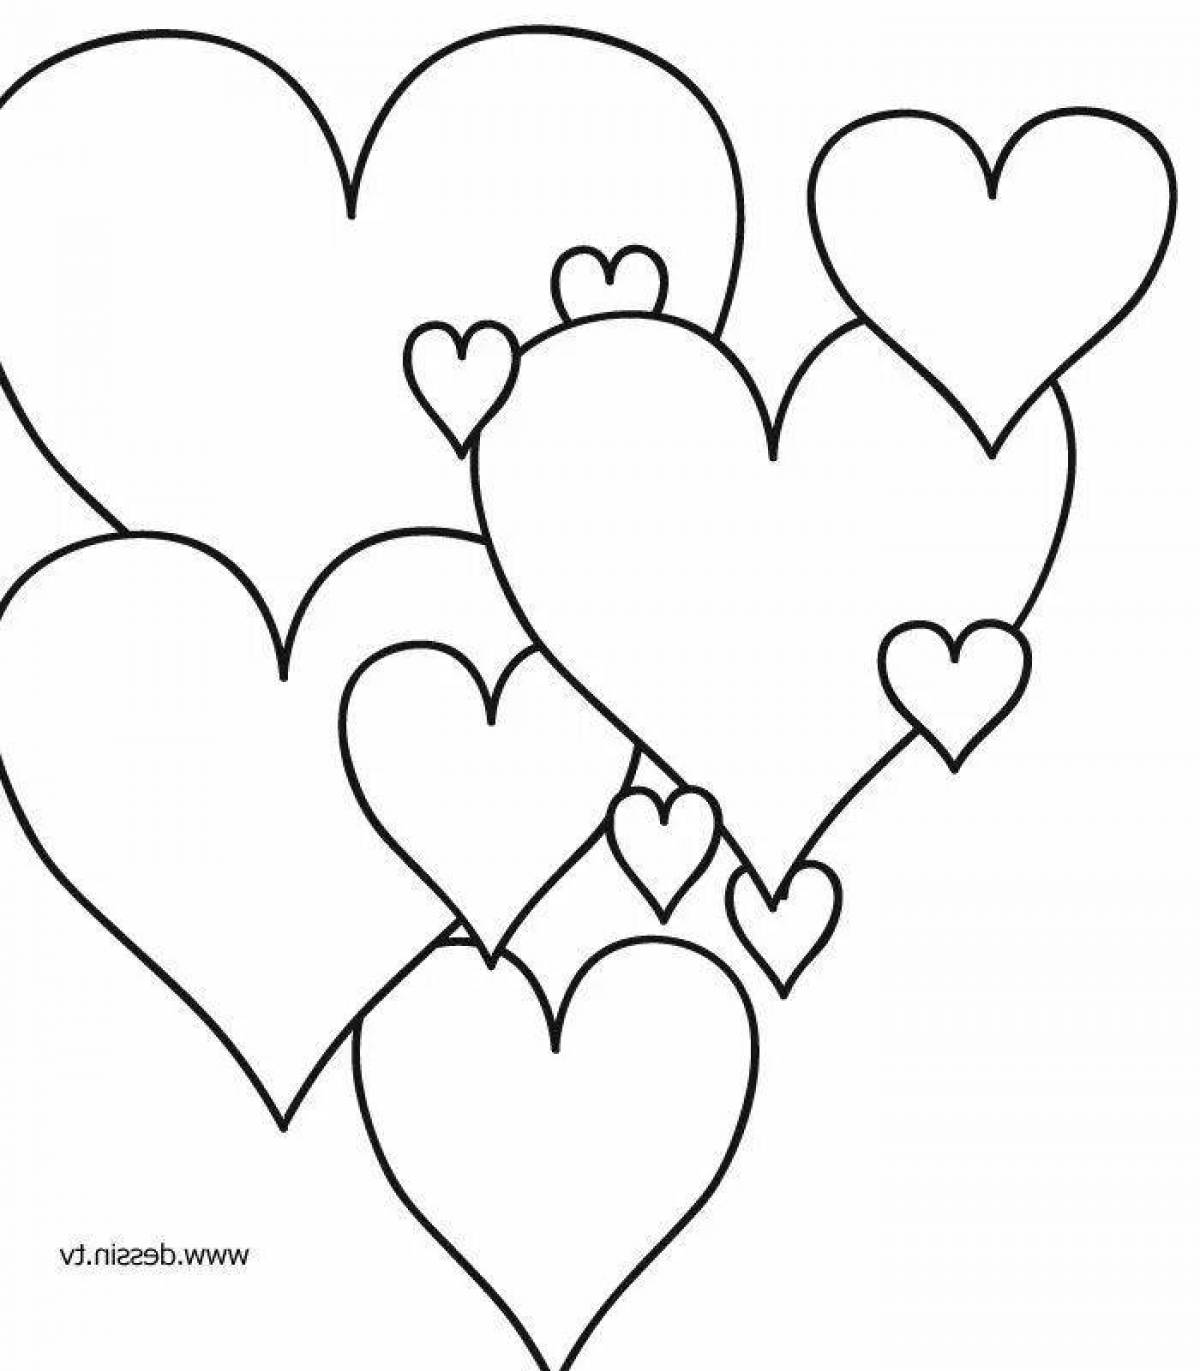 Coloring book shining heart for kids